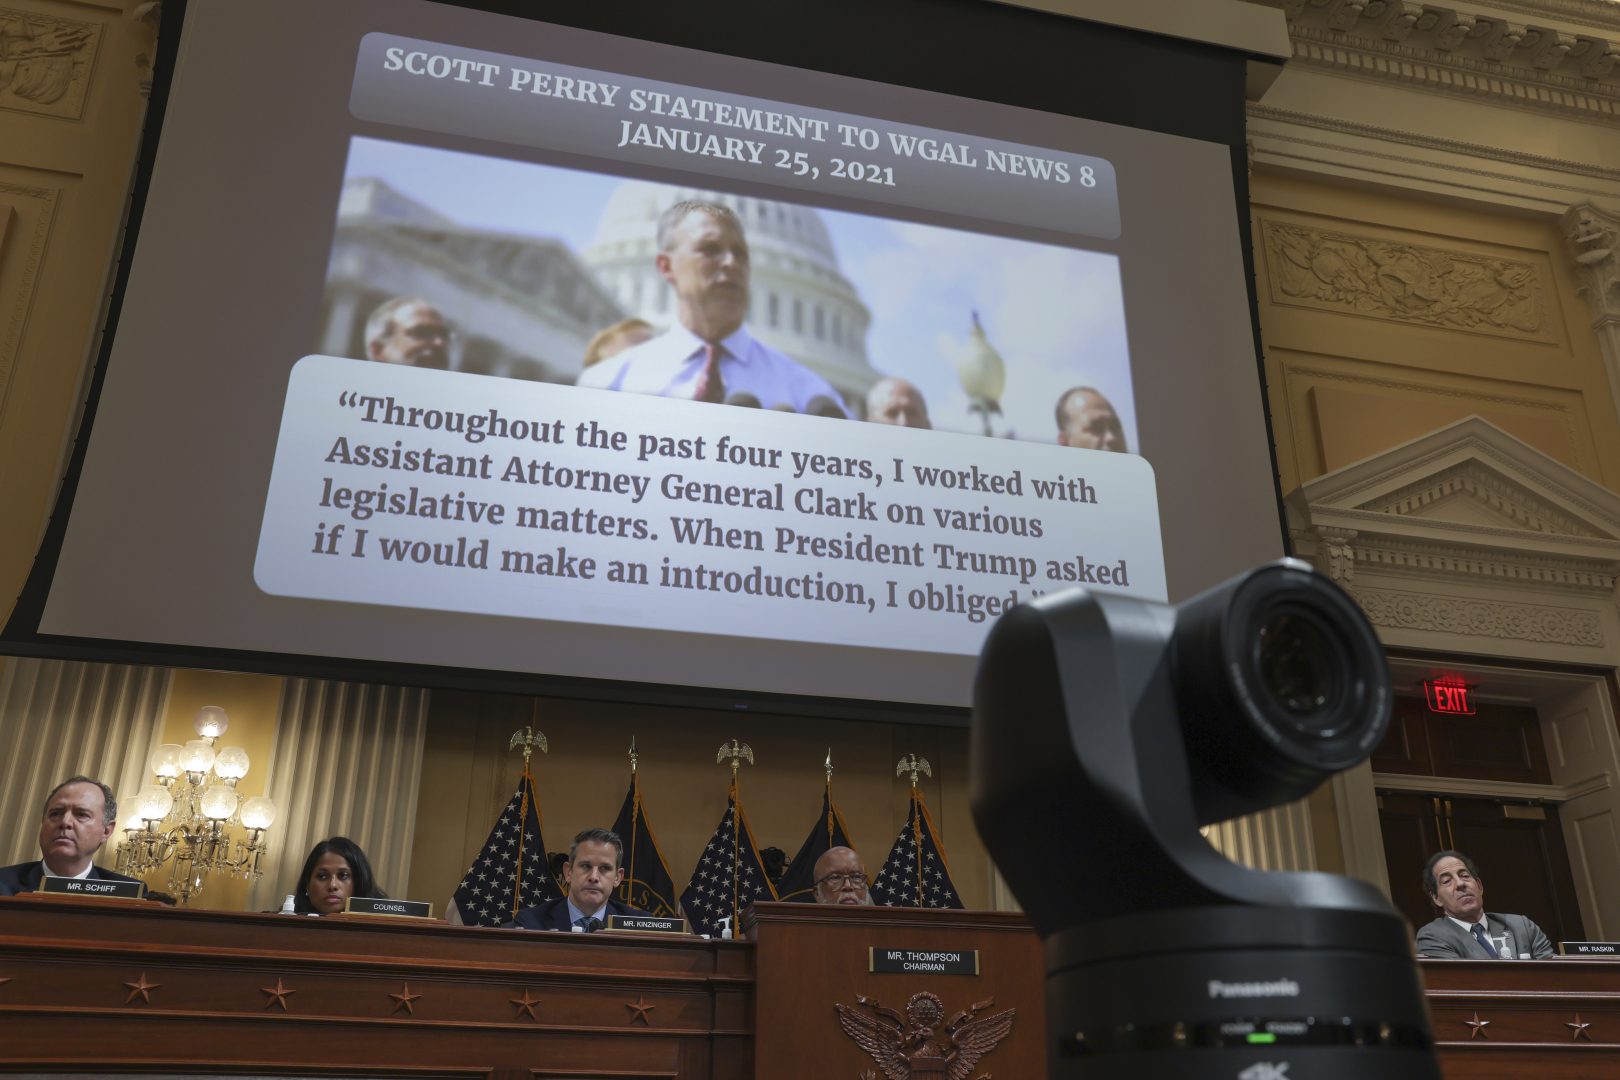 WASHINGTON, DC - JUNE 23: A video featuring Rep. Scott Perry (R-PA) is played during the fifth hearing by the House Select Committee to Investigate the January 6th Attack on the U.S. Capitol in the Cannon House Office Building on June 23, 2022 in Washington, DC. The bipartisan committee, which has been gathering evidence for almost a year related to the January 6 attack at the U.S. Capitol, is presenting its findings in a series of televised hearings. On January 6, 2021, supporters of former President Donald Trump attacked the U.S. Capitol Building during an attempt to disrupt a congressional vote to confirm the electoral college win for President Joe Biden. 